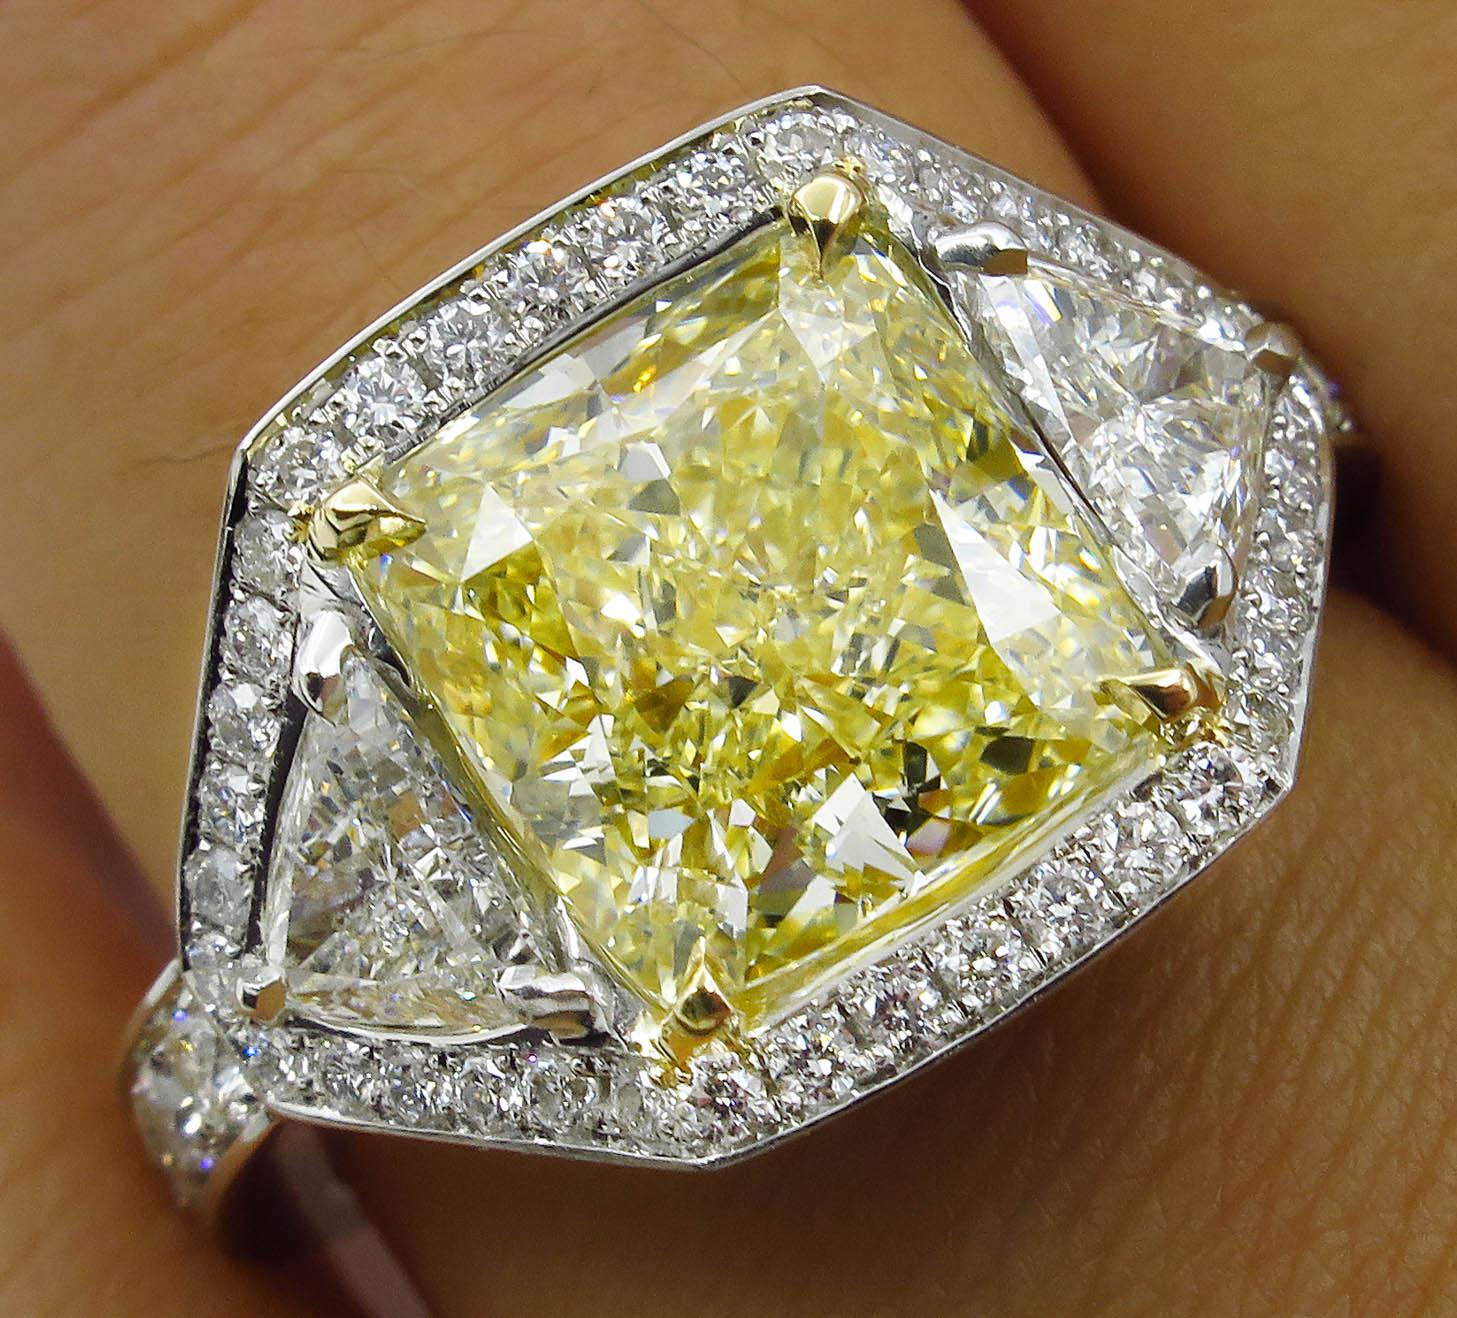 Gorgeous Estate Vintage Diamond Ring with 4.03ct CUSHION Brilliant Center Diamond GIA Certified NATURAL FANCY Light YELLOW Color, SI1 clarity (Eye clear). Beautiful Color, super Brilliant, appears FANCY Yellow, EVEN color distribution! The